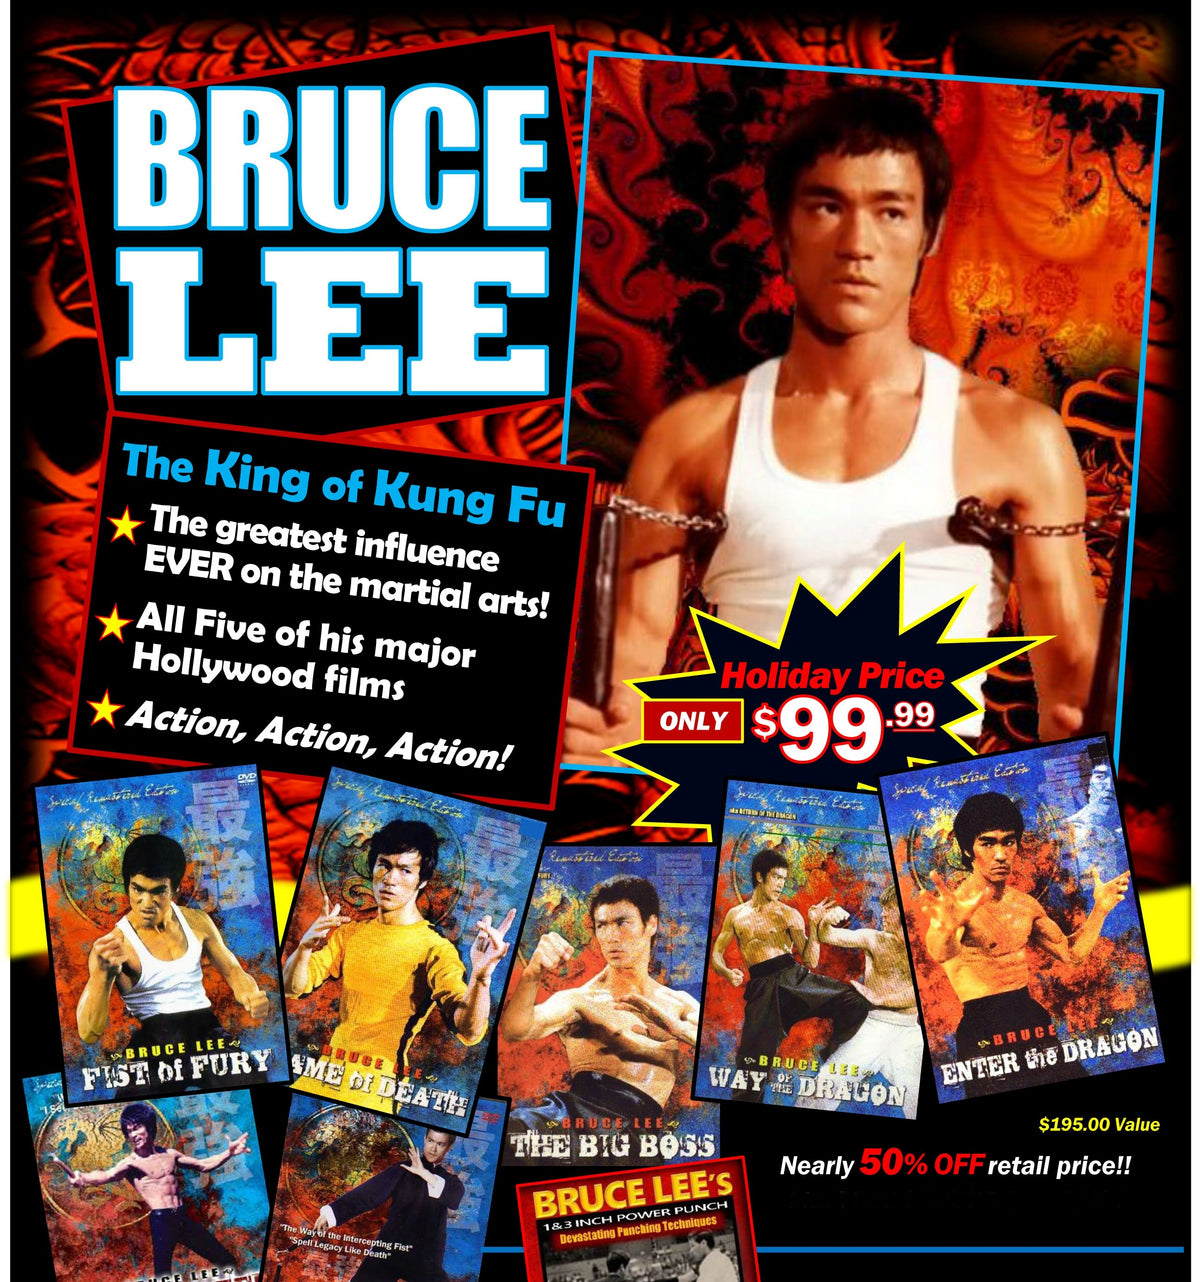 6 DVD SET Bruce Lee Movies /TV Shows + Collector Magazine + 1" & 3" Power Punch DVD